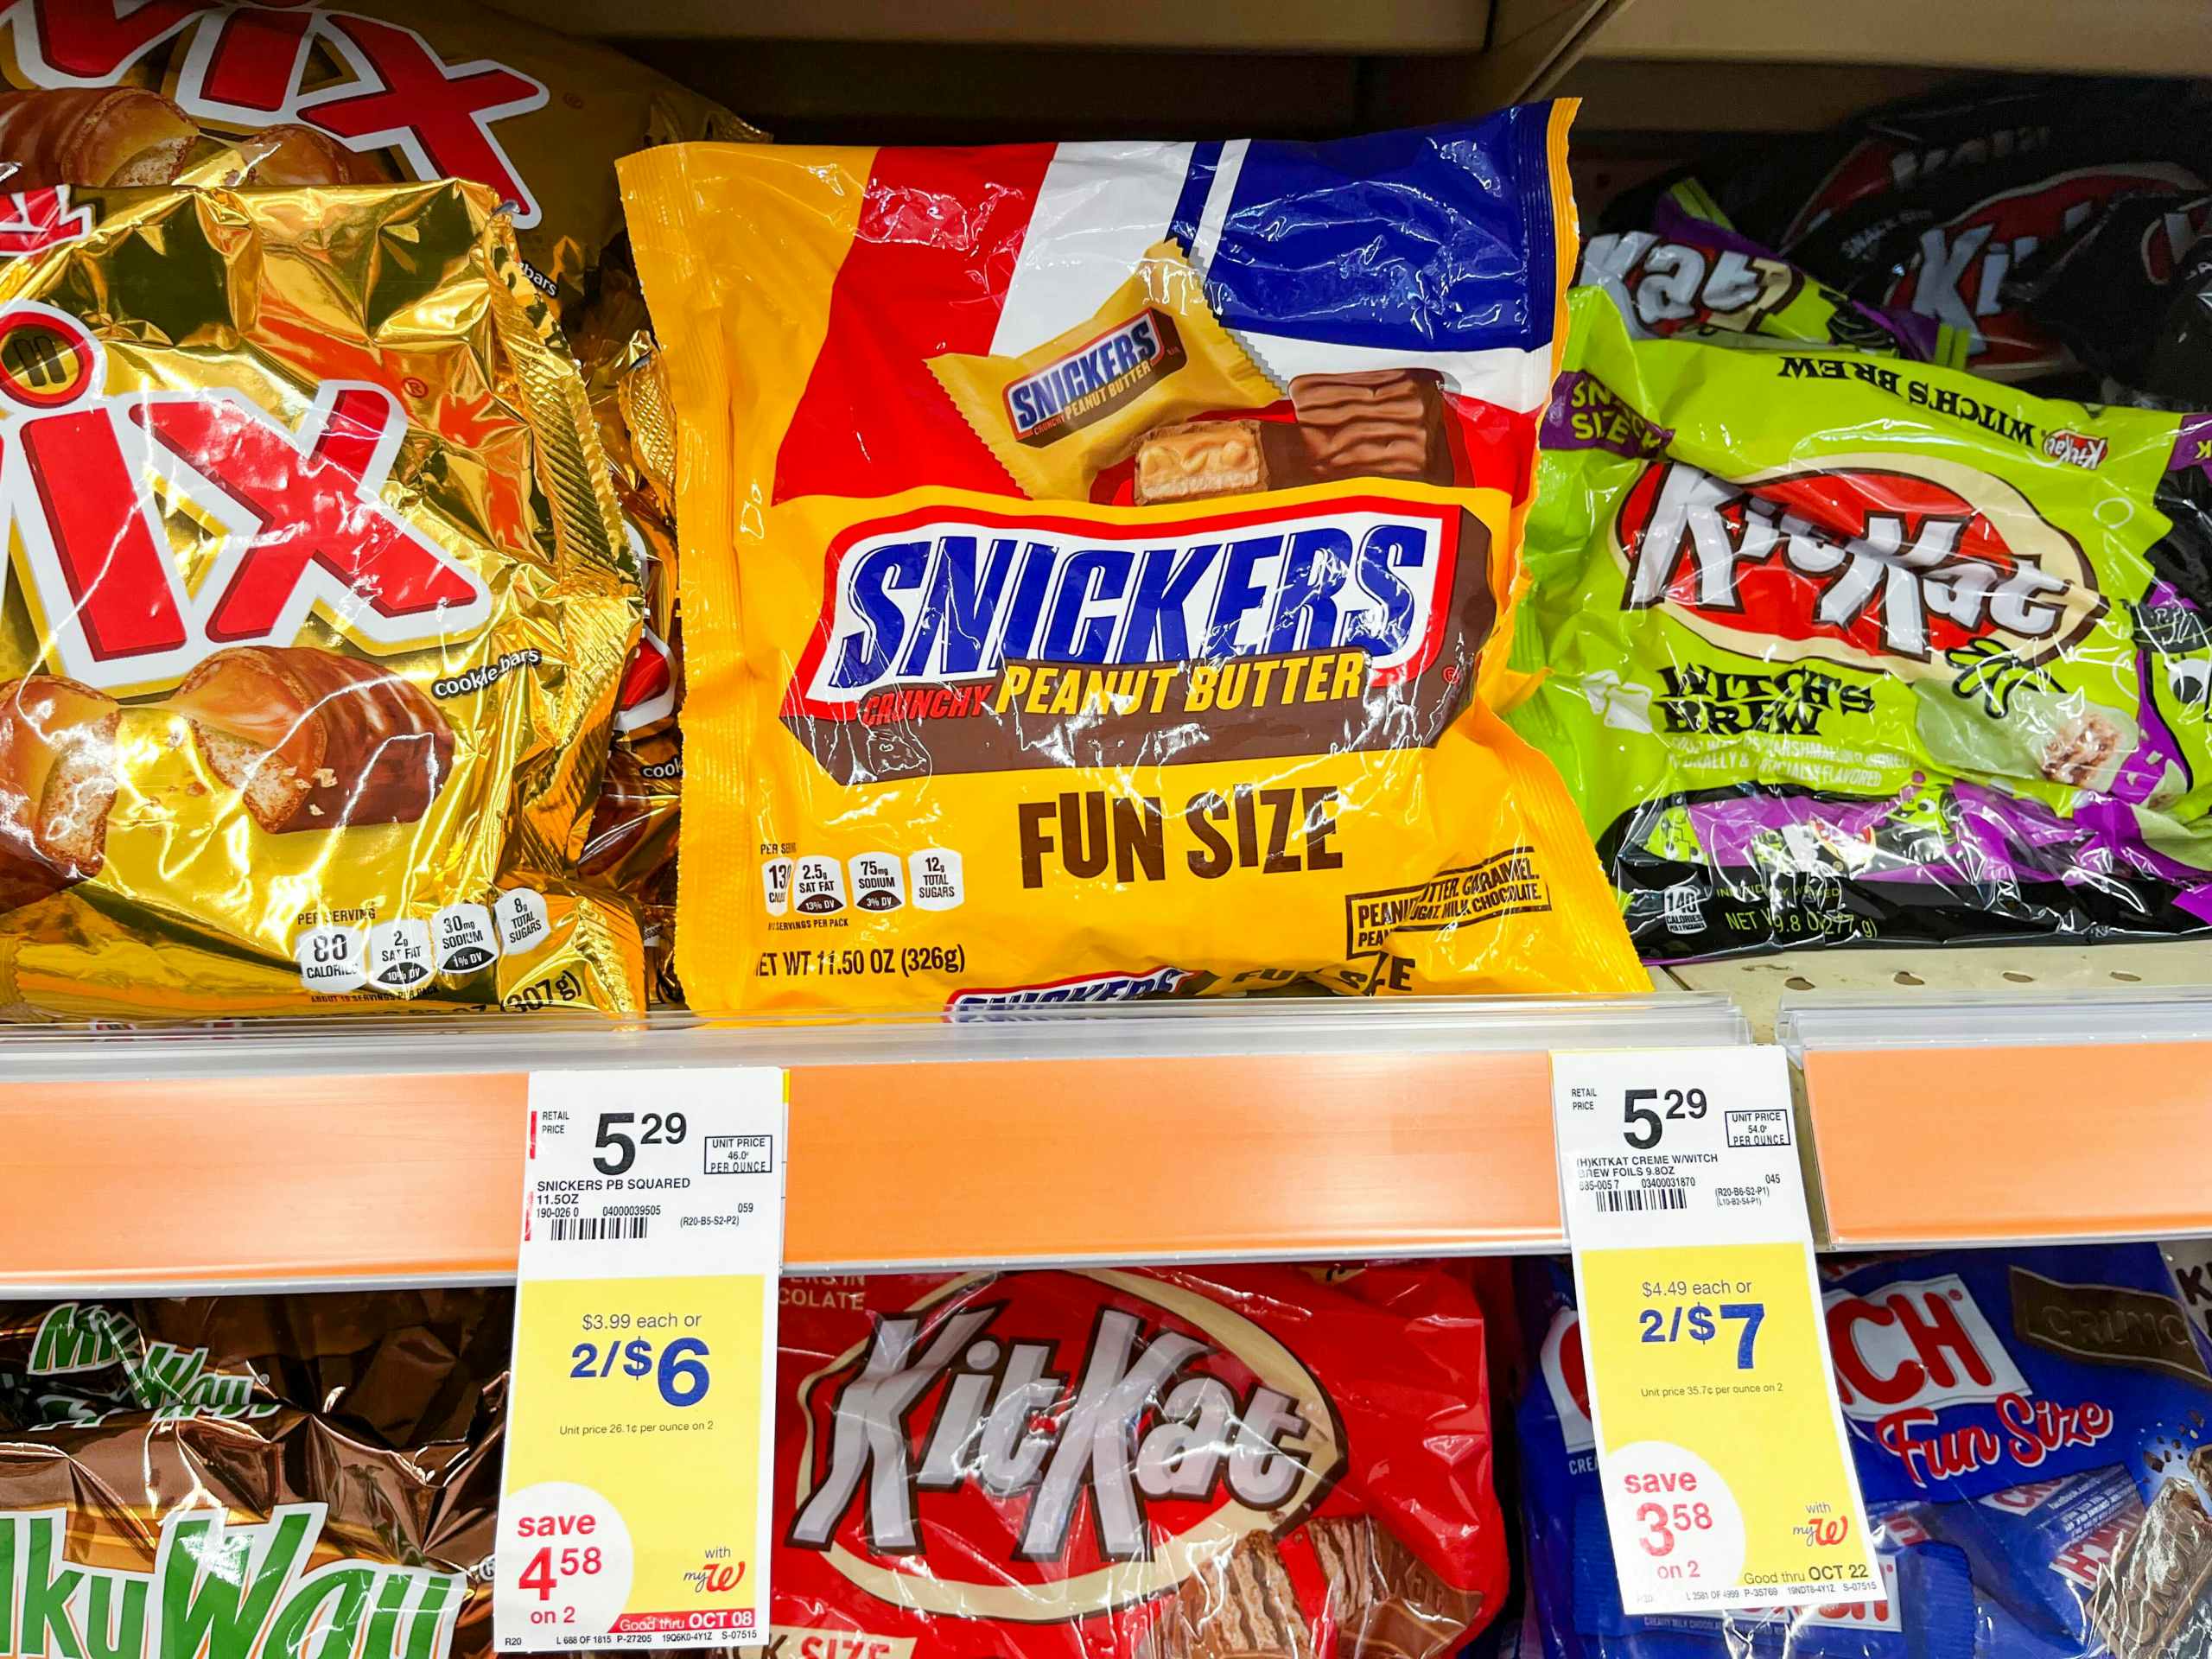 bag of Snickers Fun Size Chocolate on